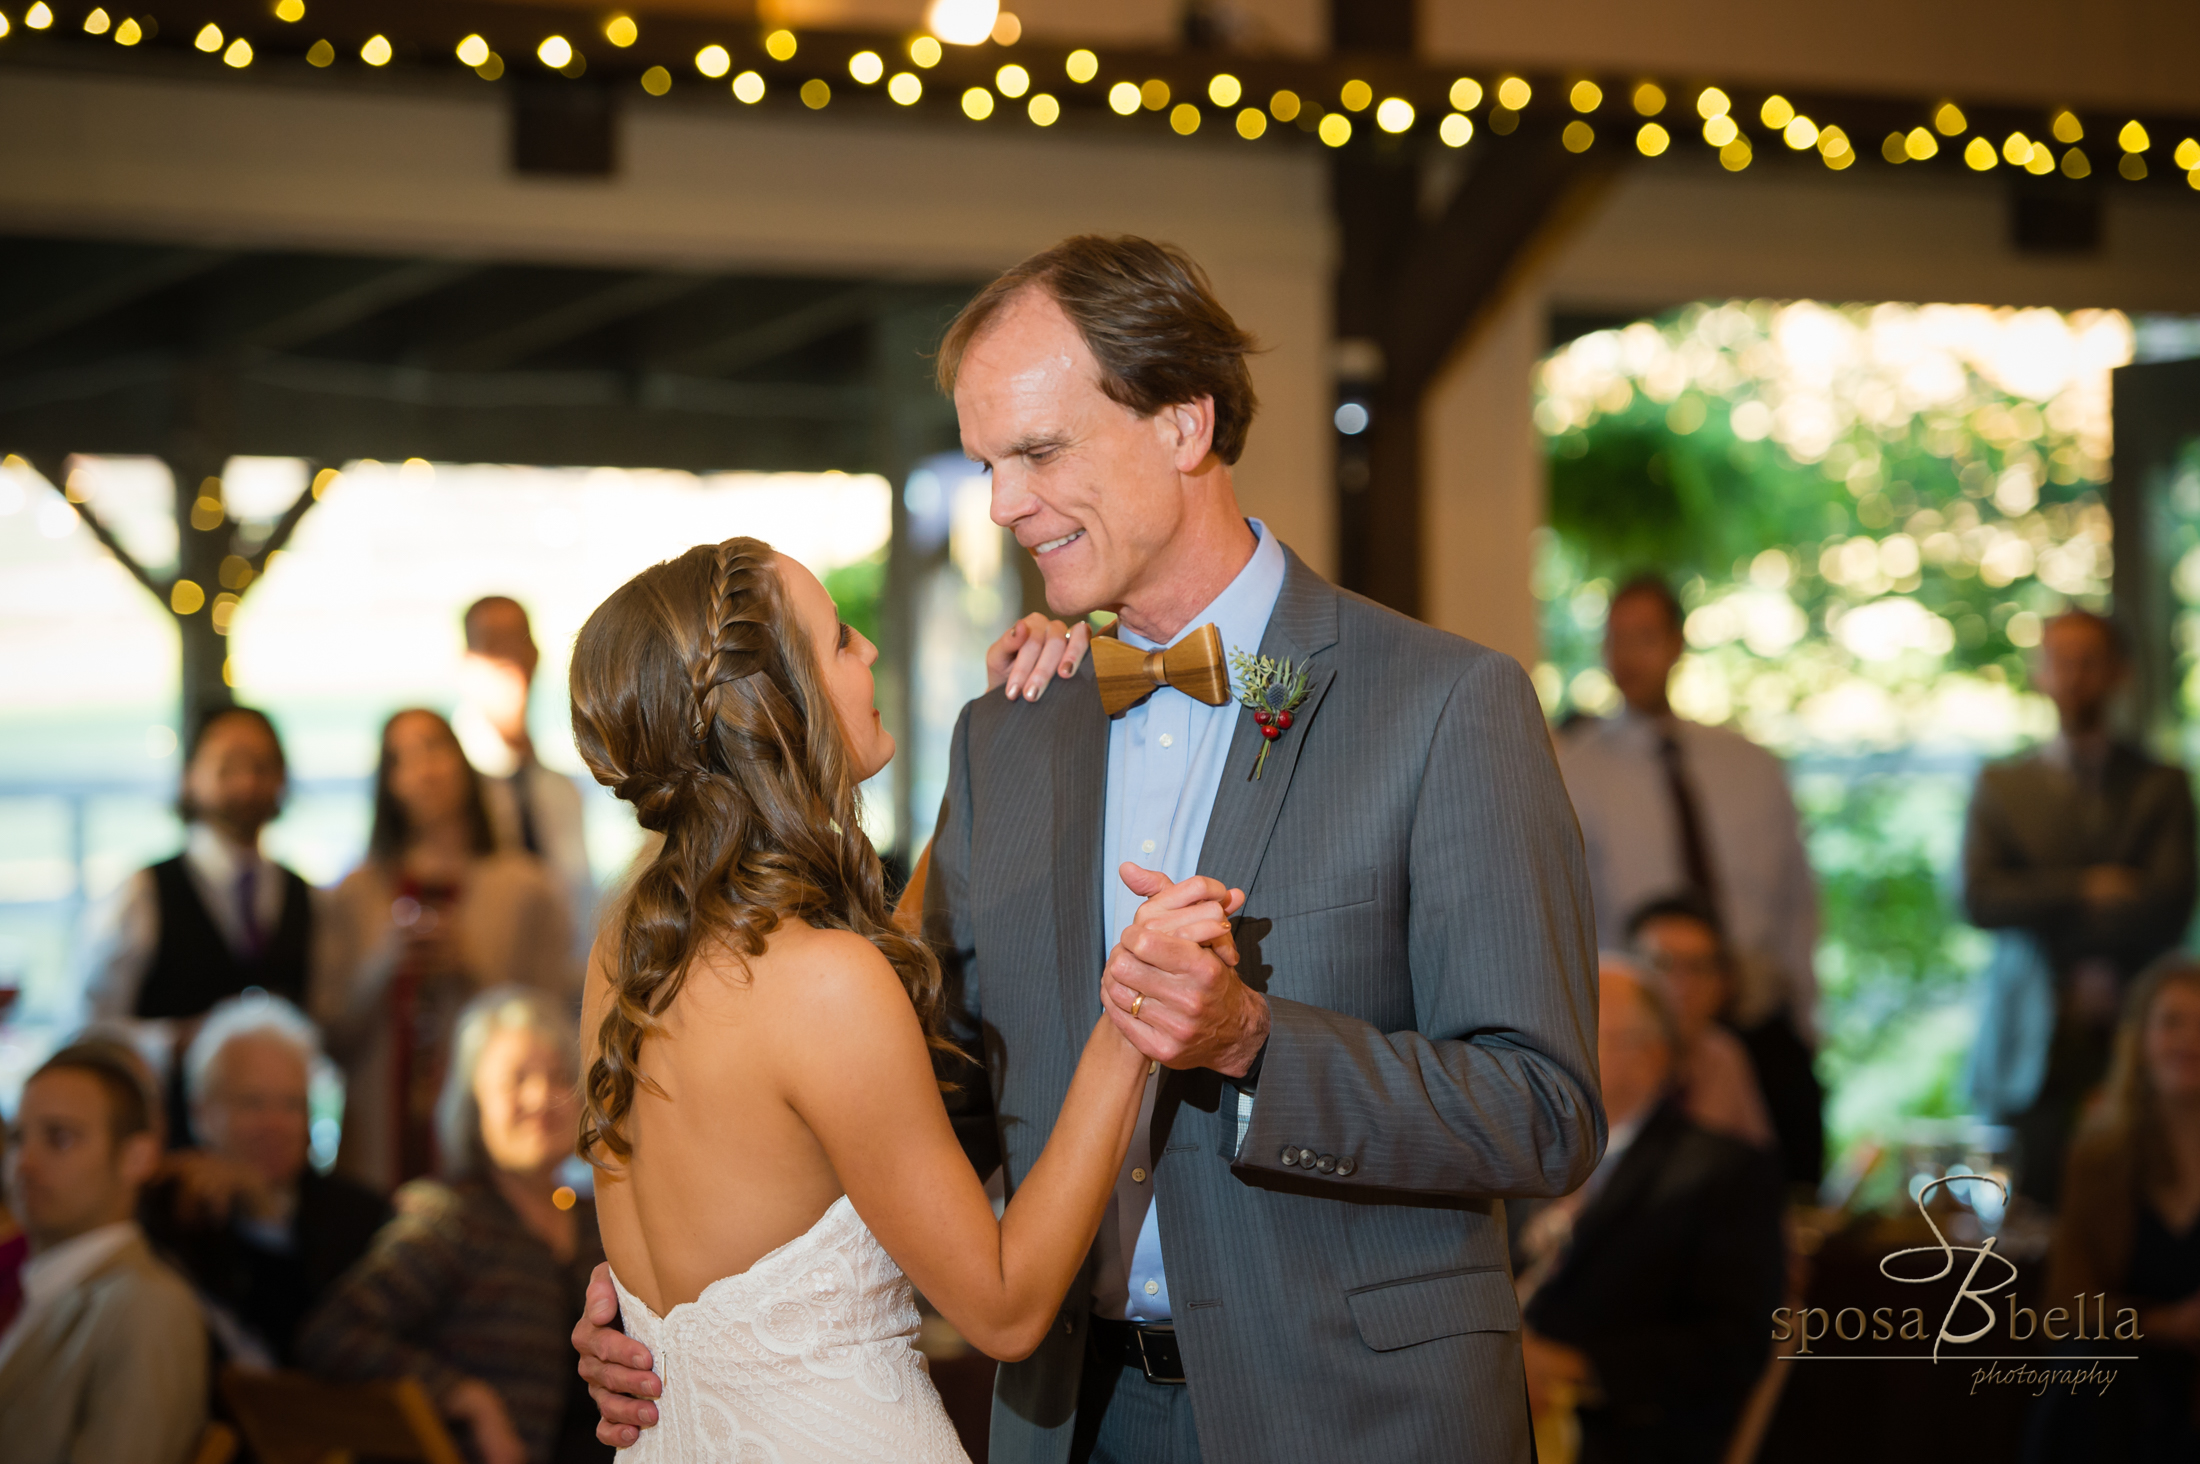  "All My Life" by the Beatles is a perfect track for a Father/Daughter dance. 